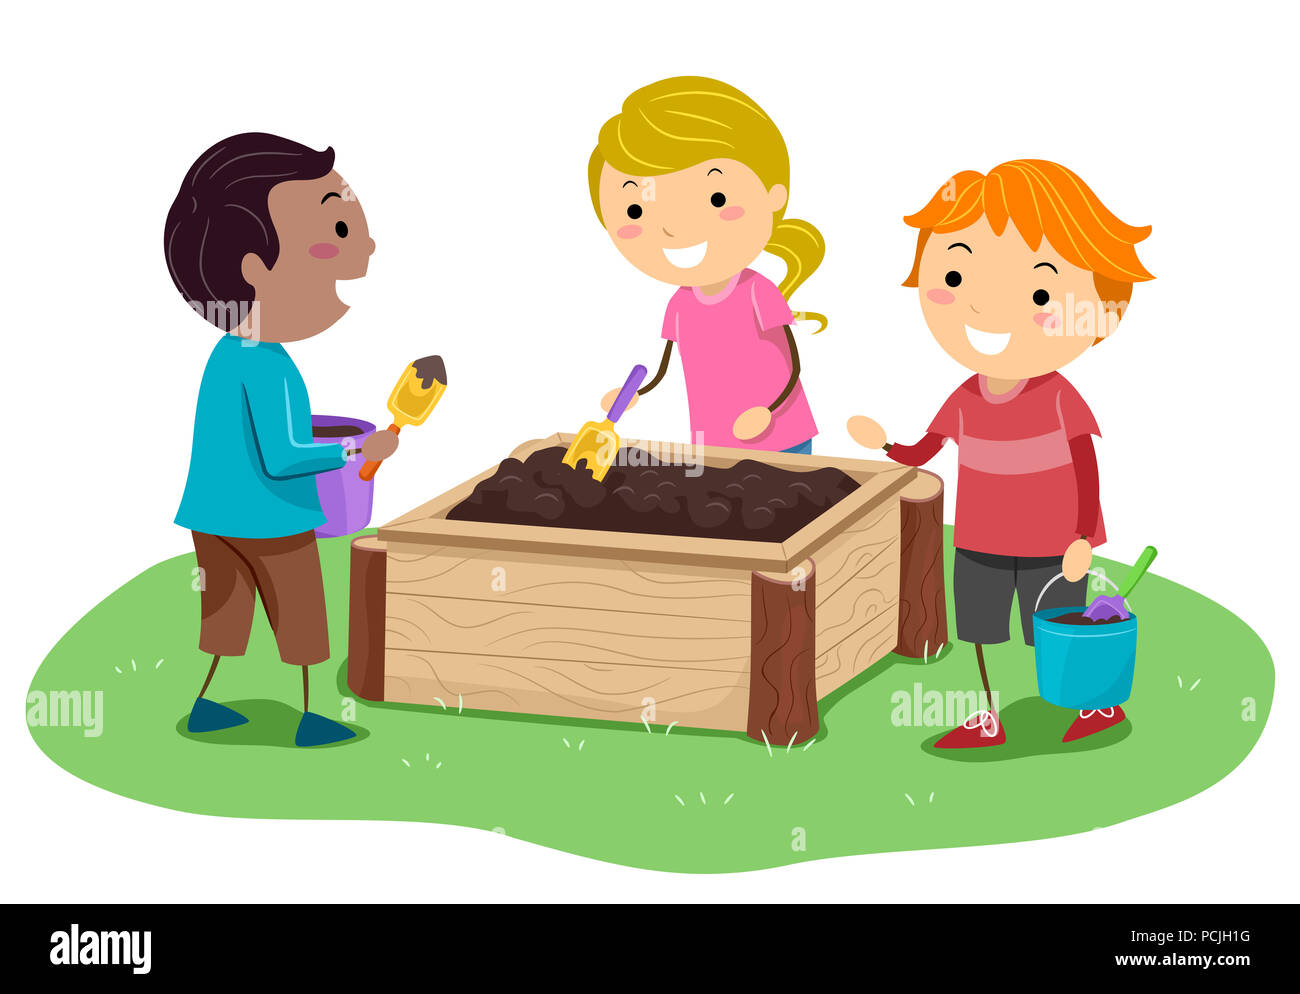 Illustration of Stickman Kids Playing with Mud in the Mud Box in the Garden Stock Photo